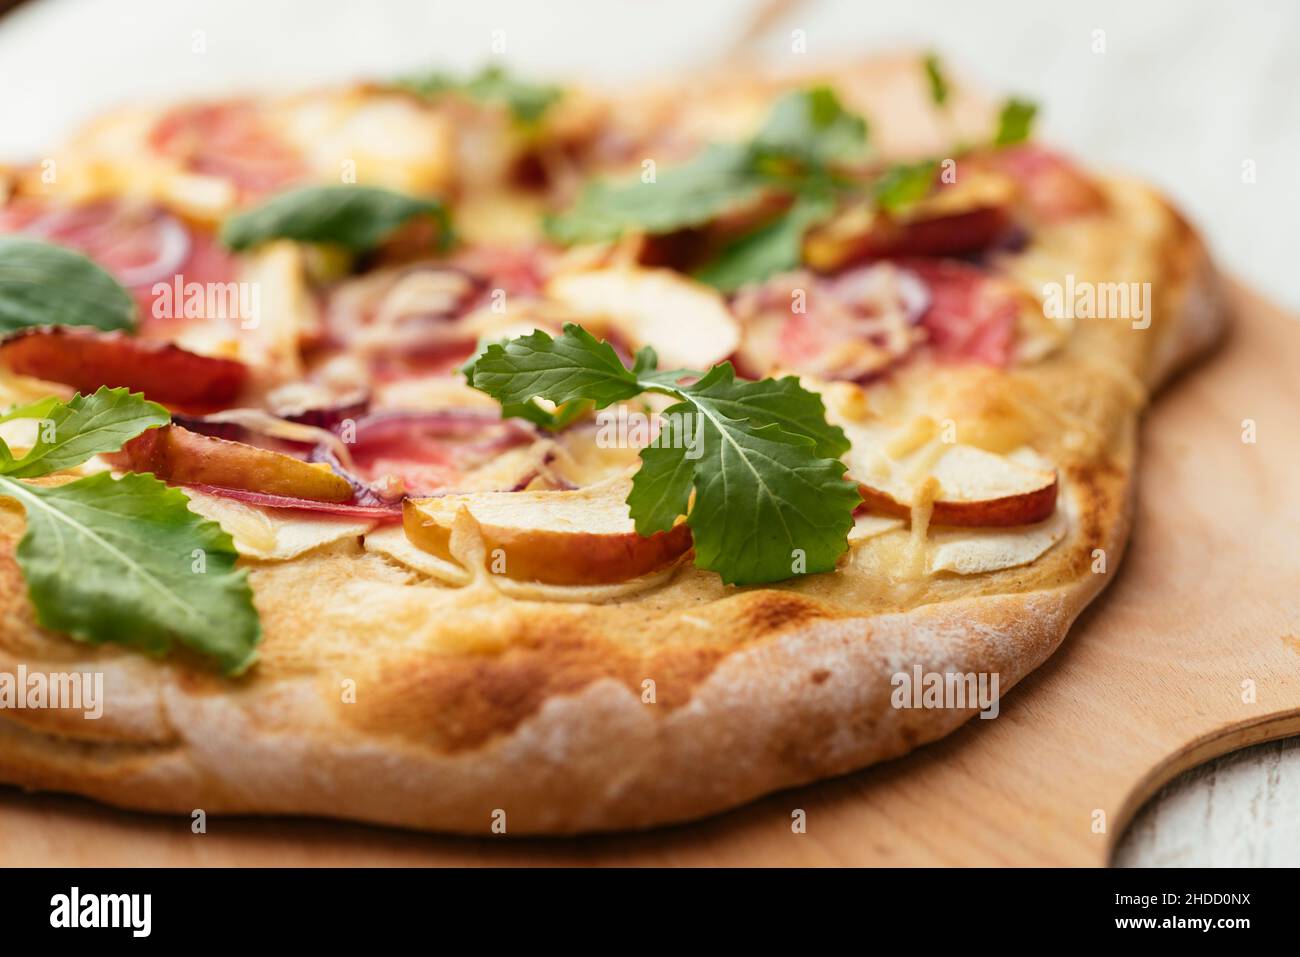 Home made vegan pizza with parsnip, apple and chioggia beet. Stock Photo